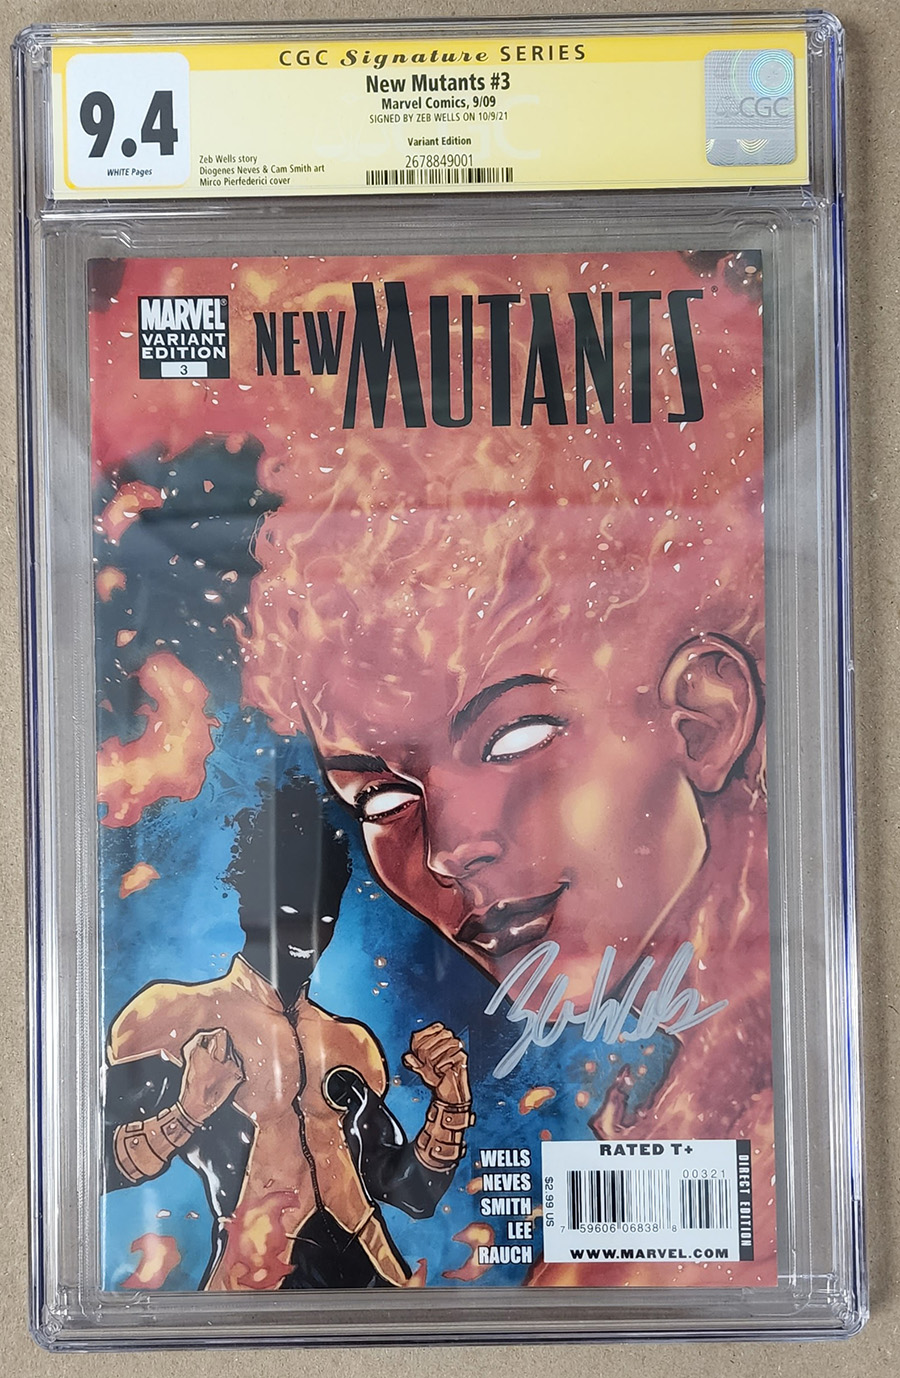 New Mutants Vol 3 #3 Cover D Signed By Zeb Wells CGC 9.4